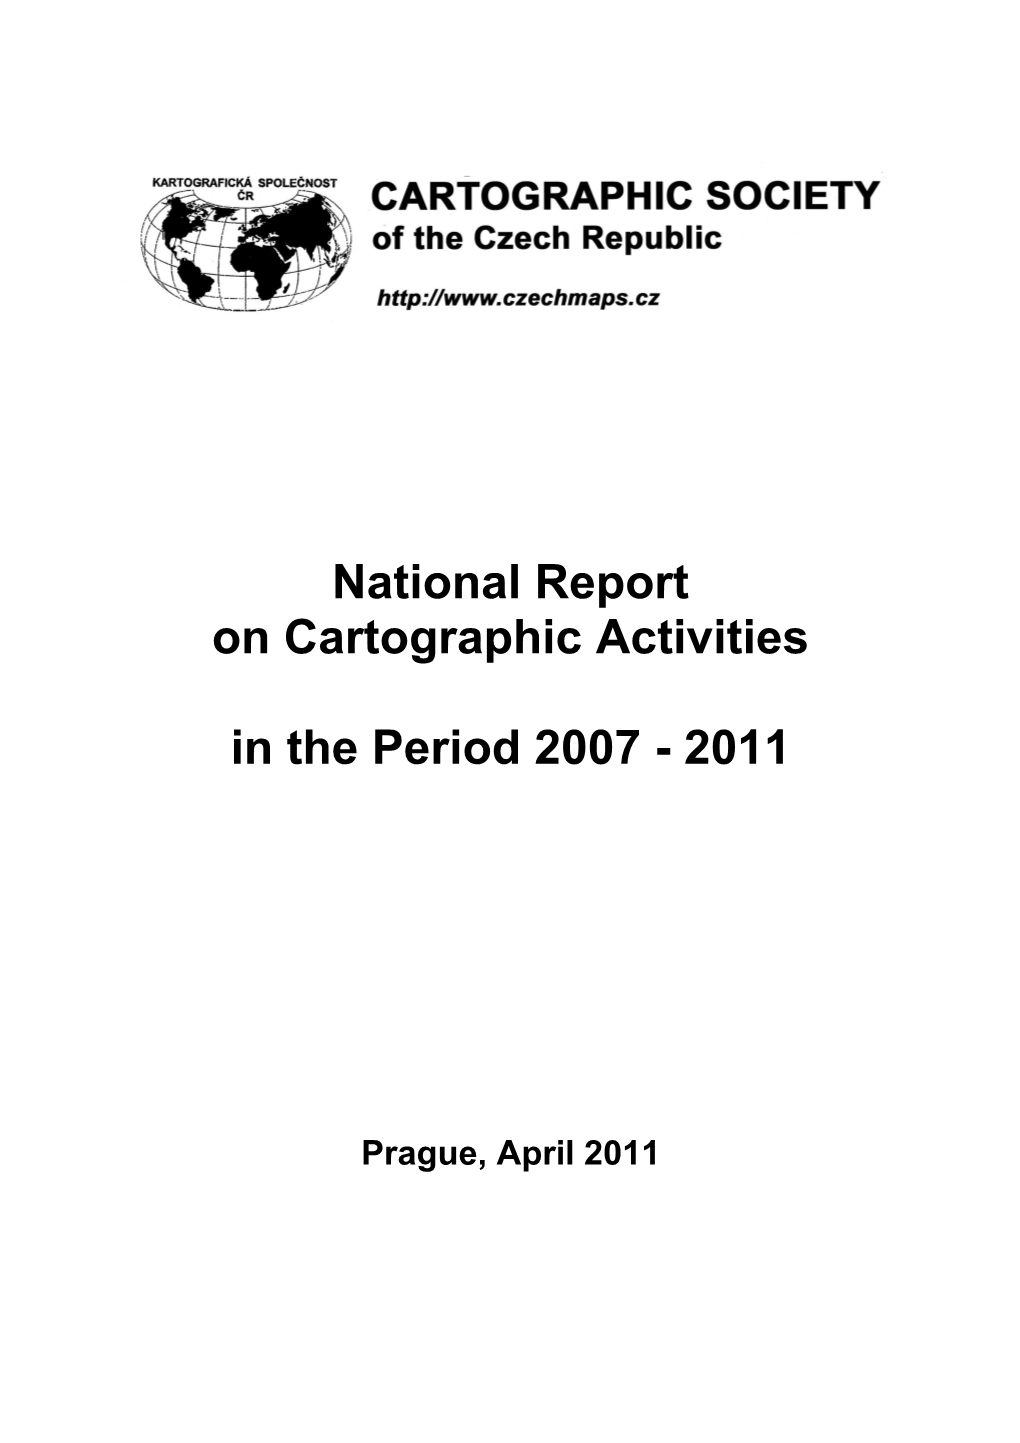 National Report on Cartographic Activities in the Period 2007